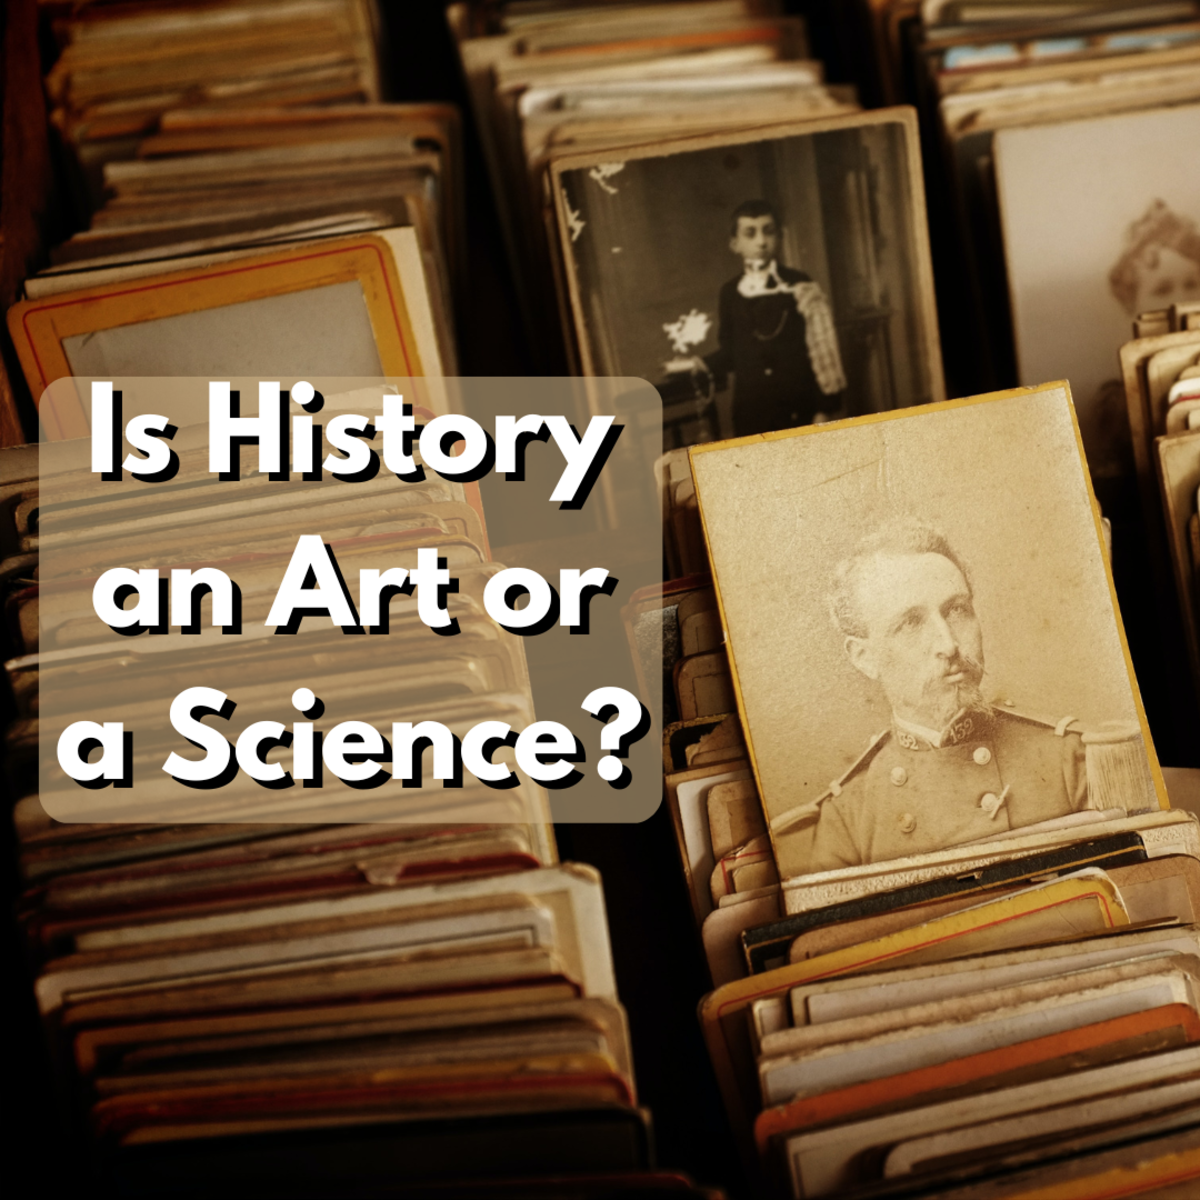 Read on to learn about the process of historical research and analysis, and where the boundaries of art and science meet in the discipline of history.